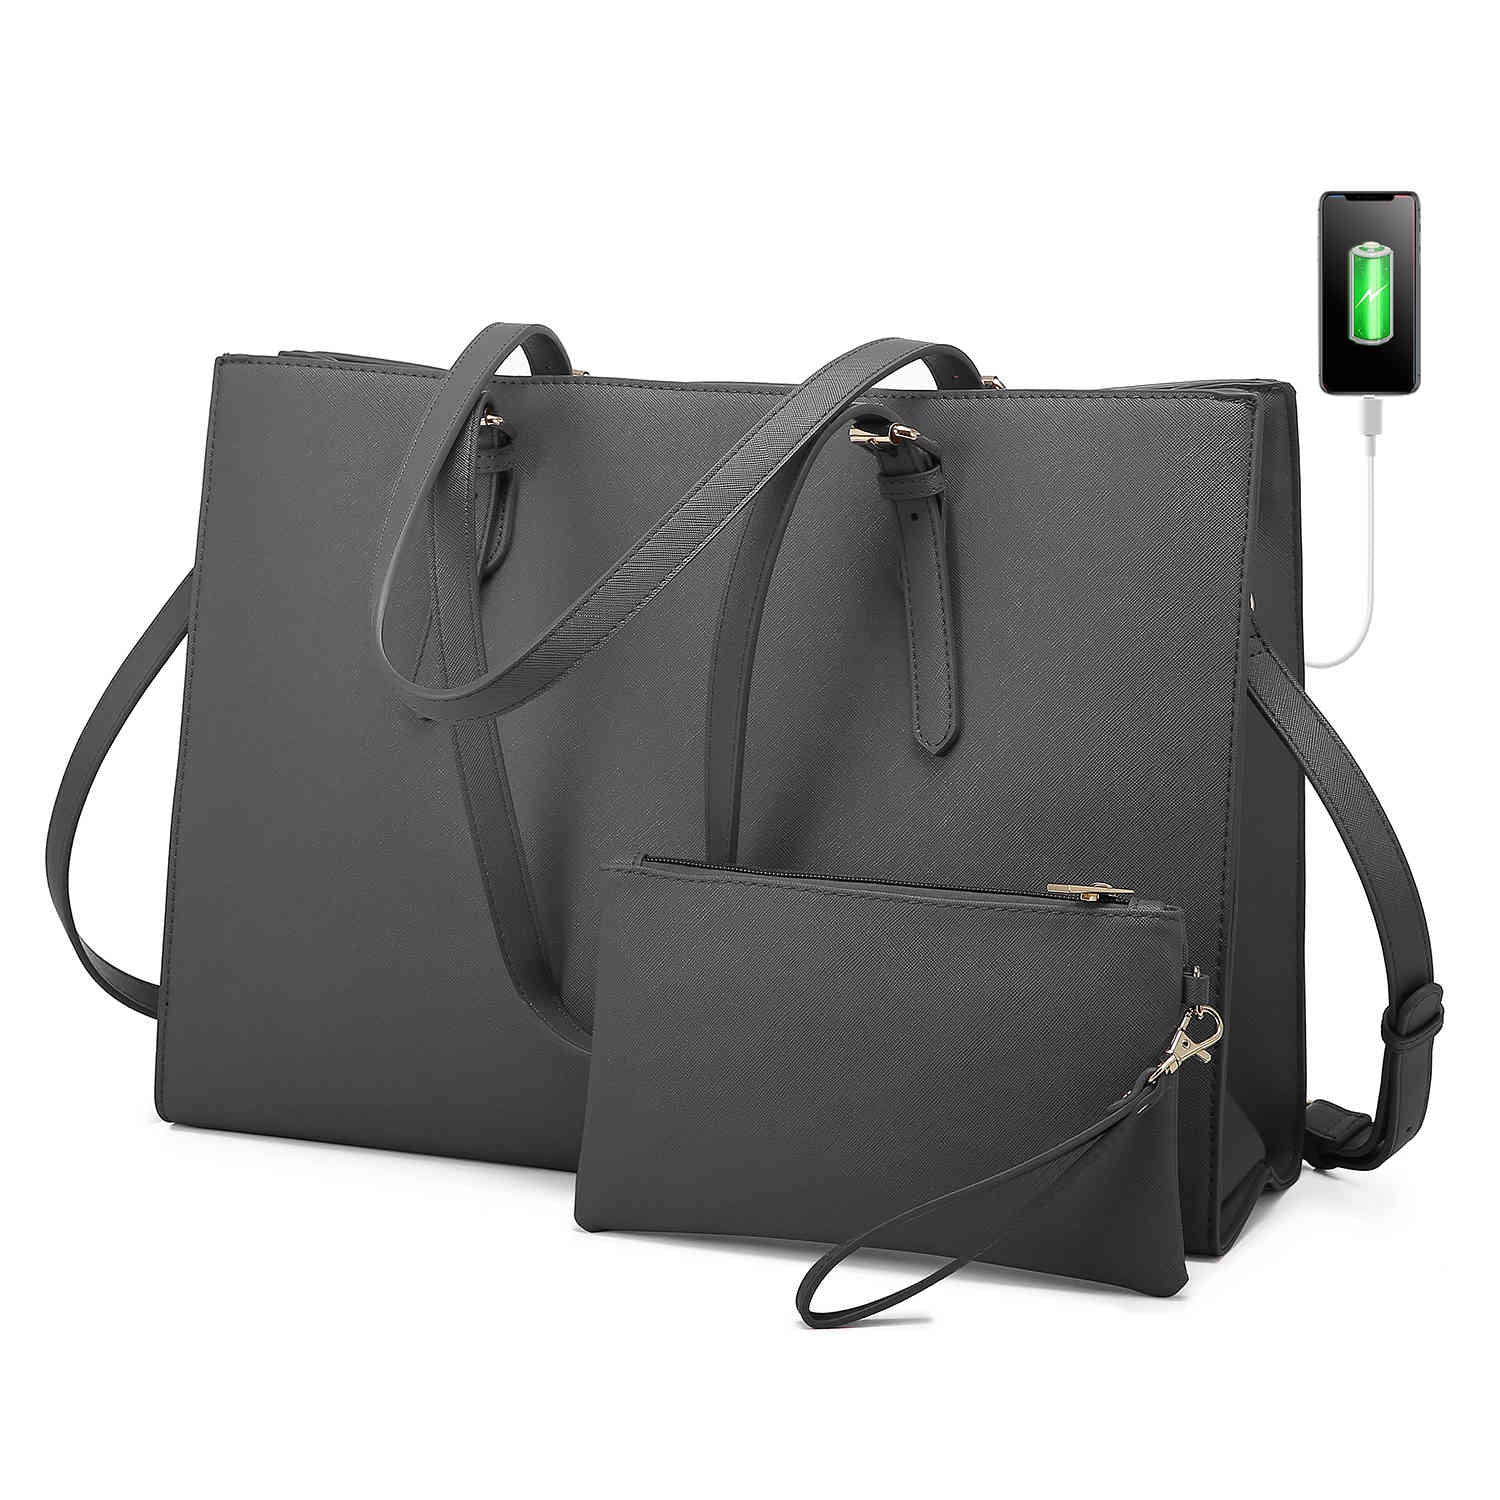 6 Stylish Laptop Bags for Women